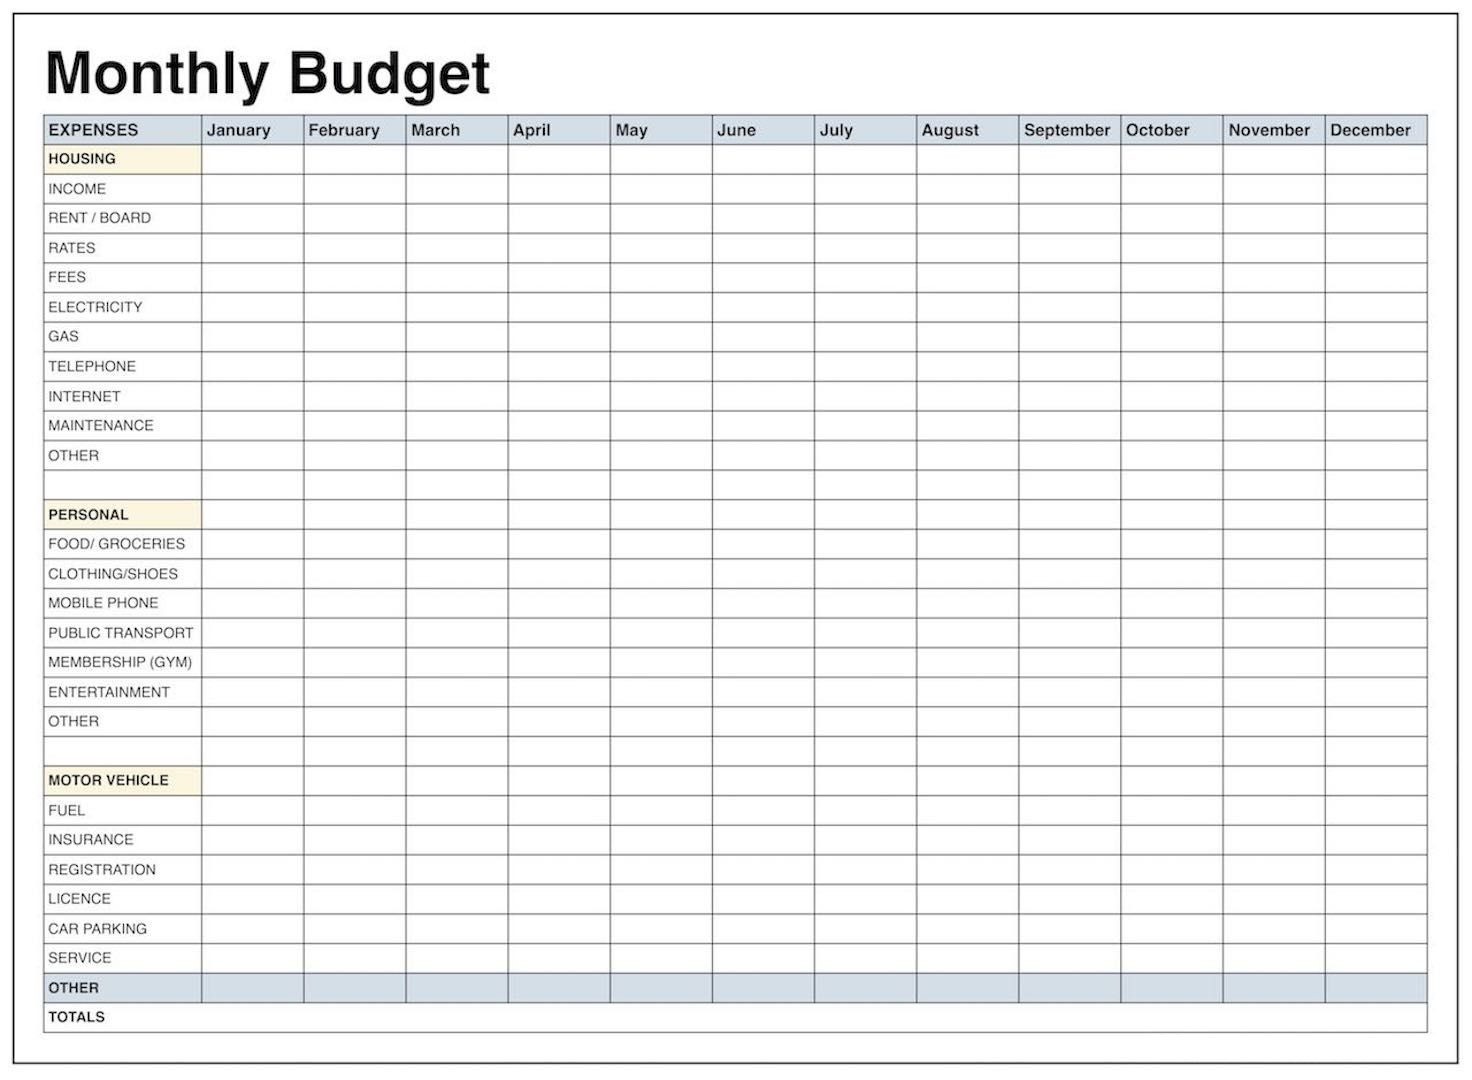 monthly budget planner template